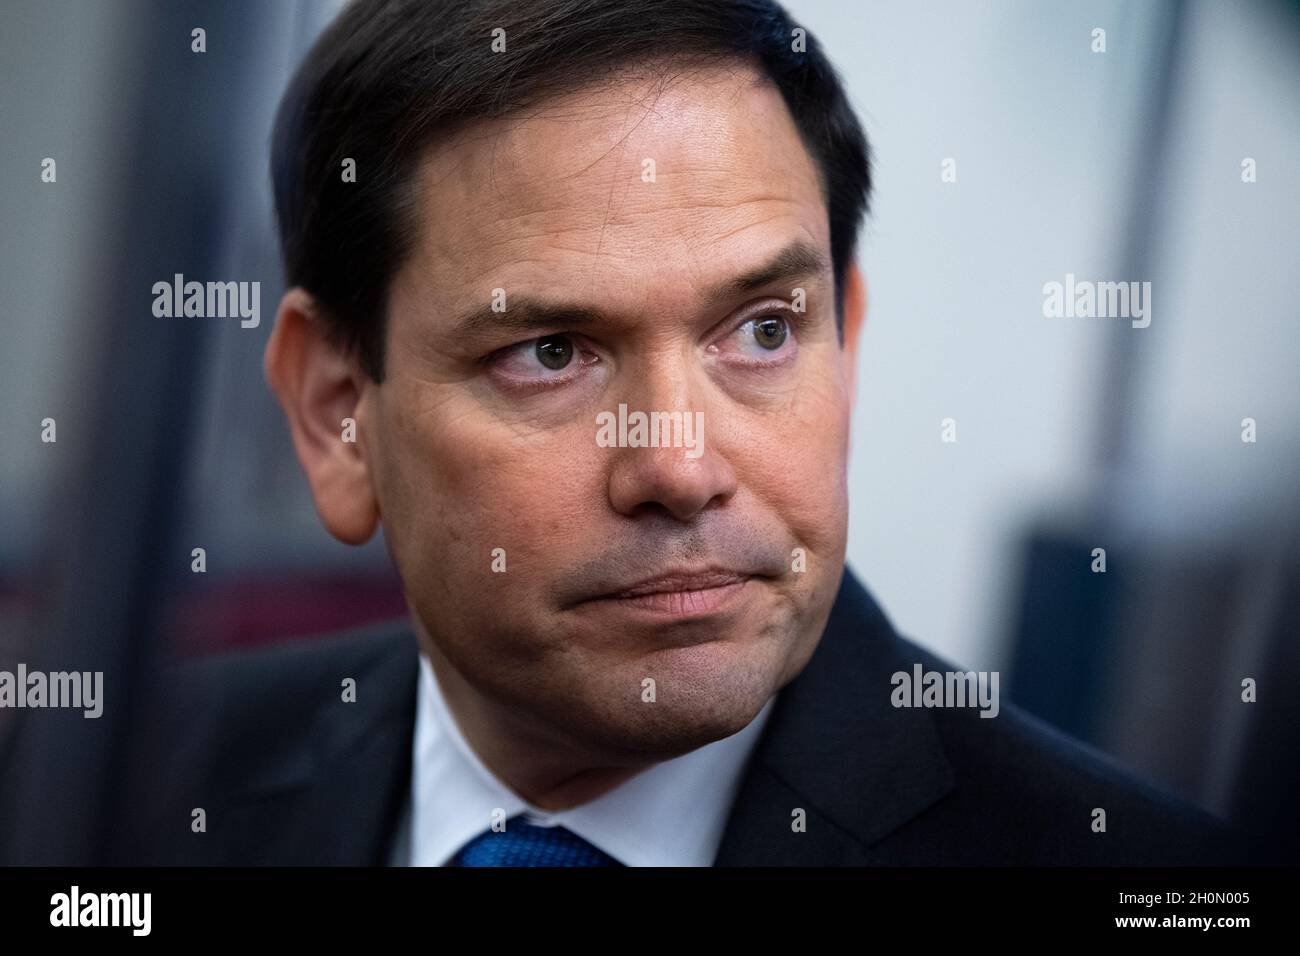 UNITED STATES - OCTOBER 5: Sen. Marco Rubio, R-Fla., is seen in the U.S. Capitol on Tuesday, October 5, 2021. (Photo By Tom Williams/CQ Roll Call/Sipa USA) Stock Photo